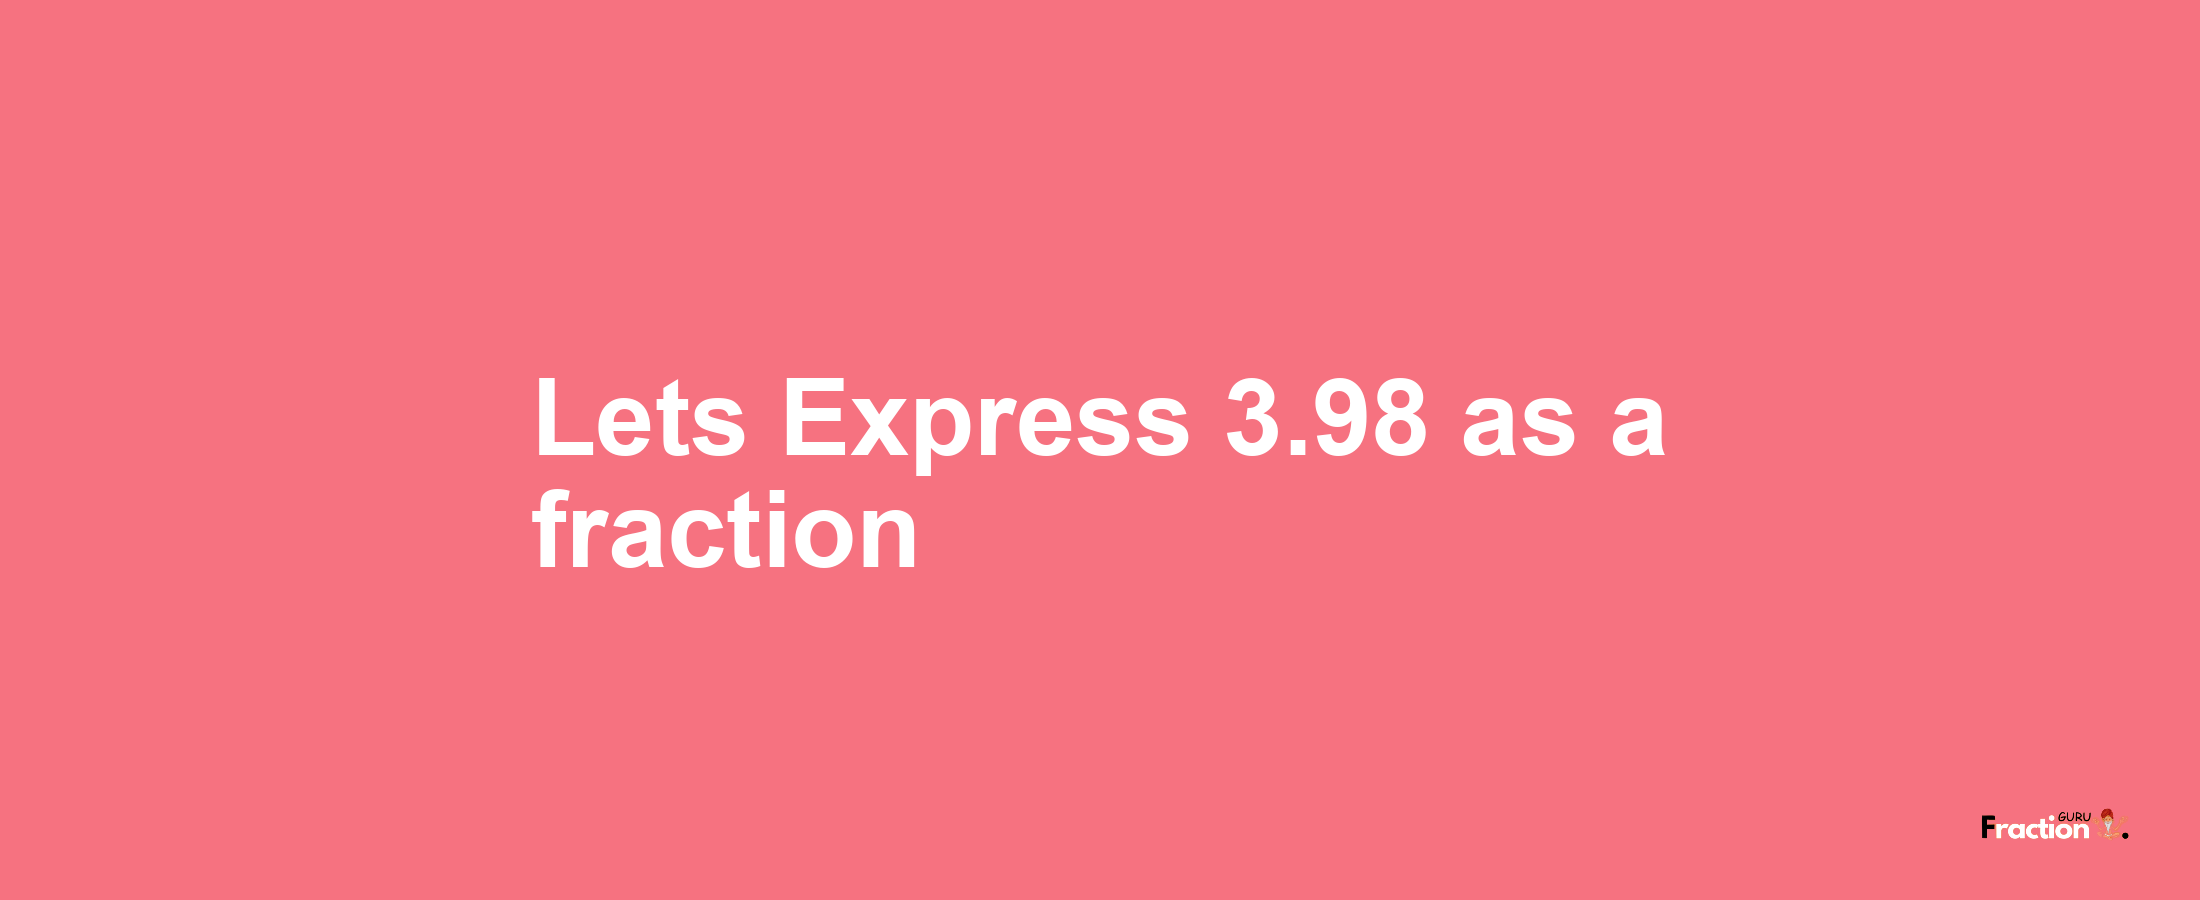 Lets Express 3.98 as afraction